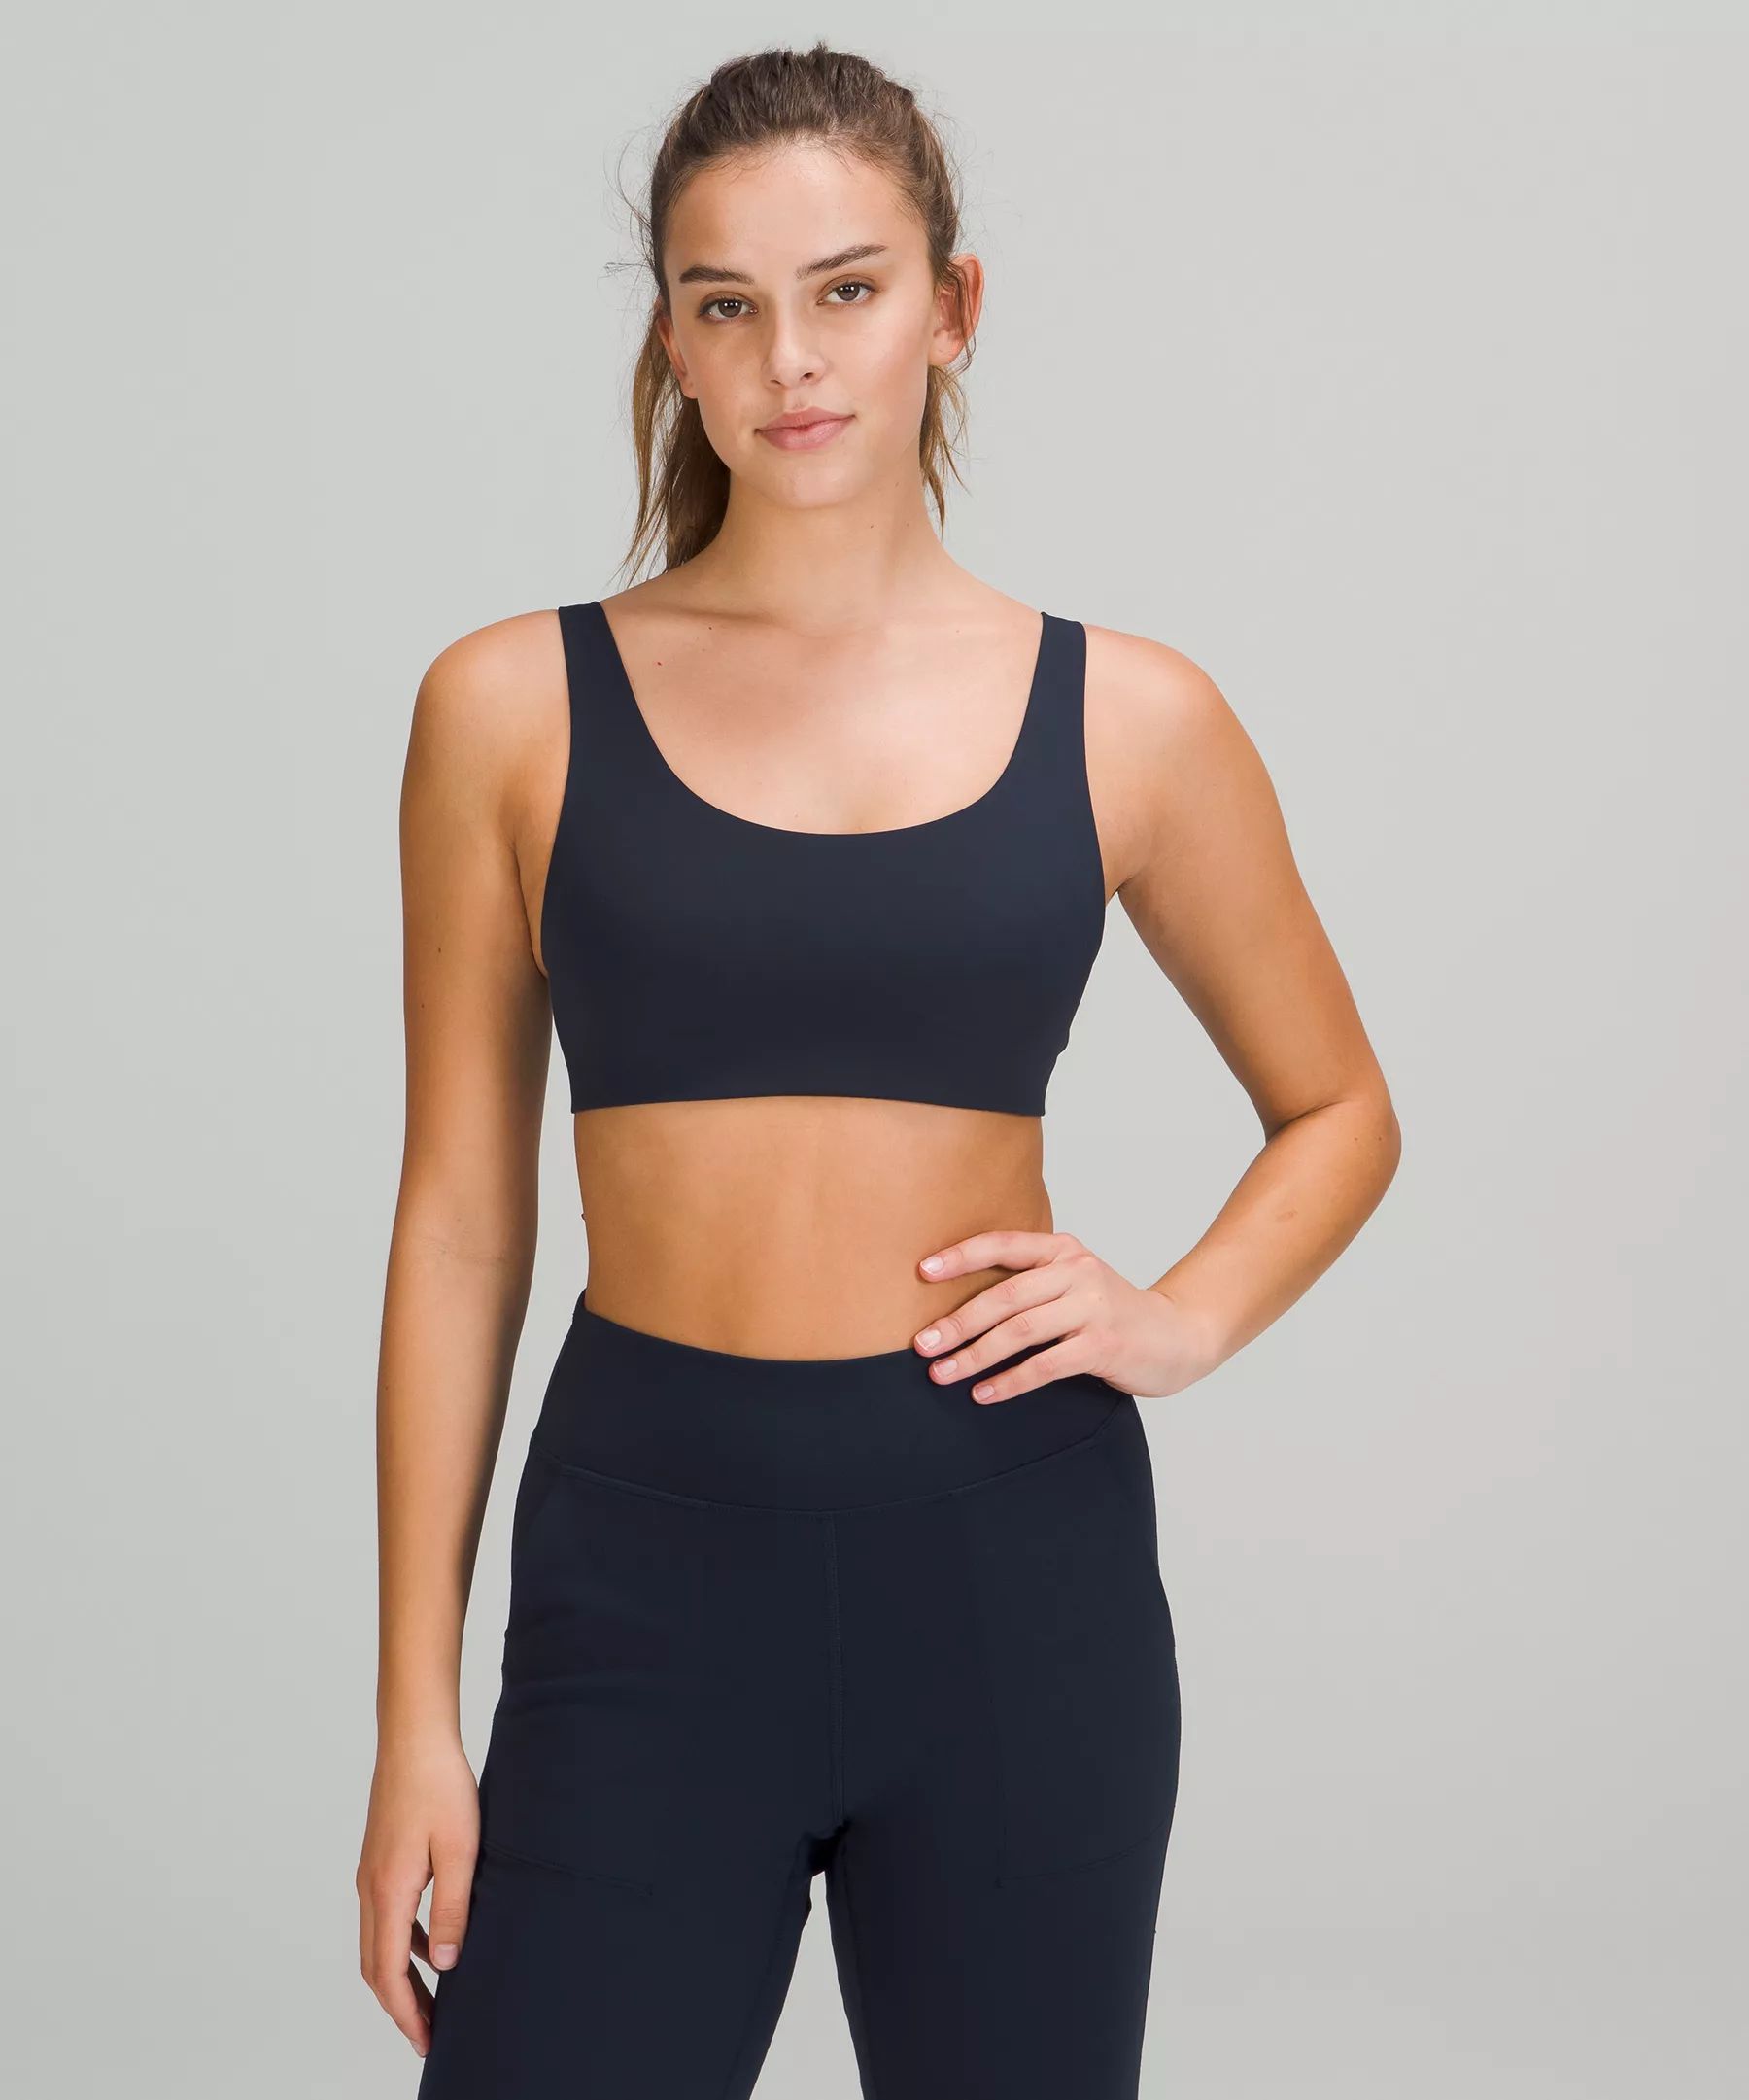 In Alignment Straight-Strap Bra Light Support, A/B Cup | Lululemon (US)